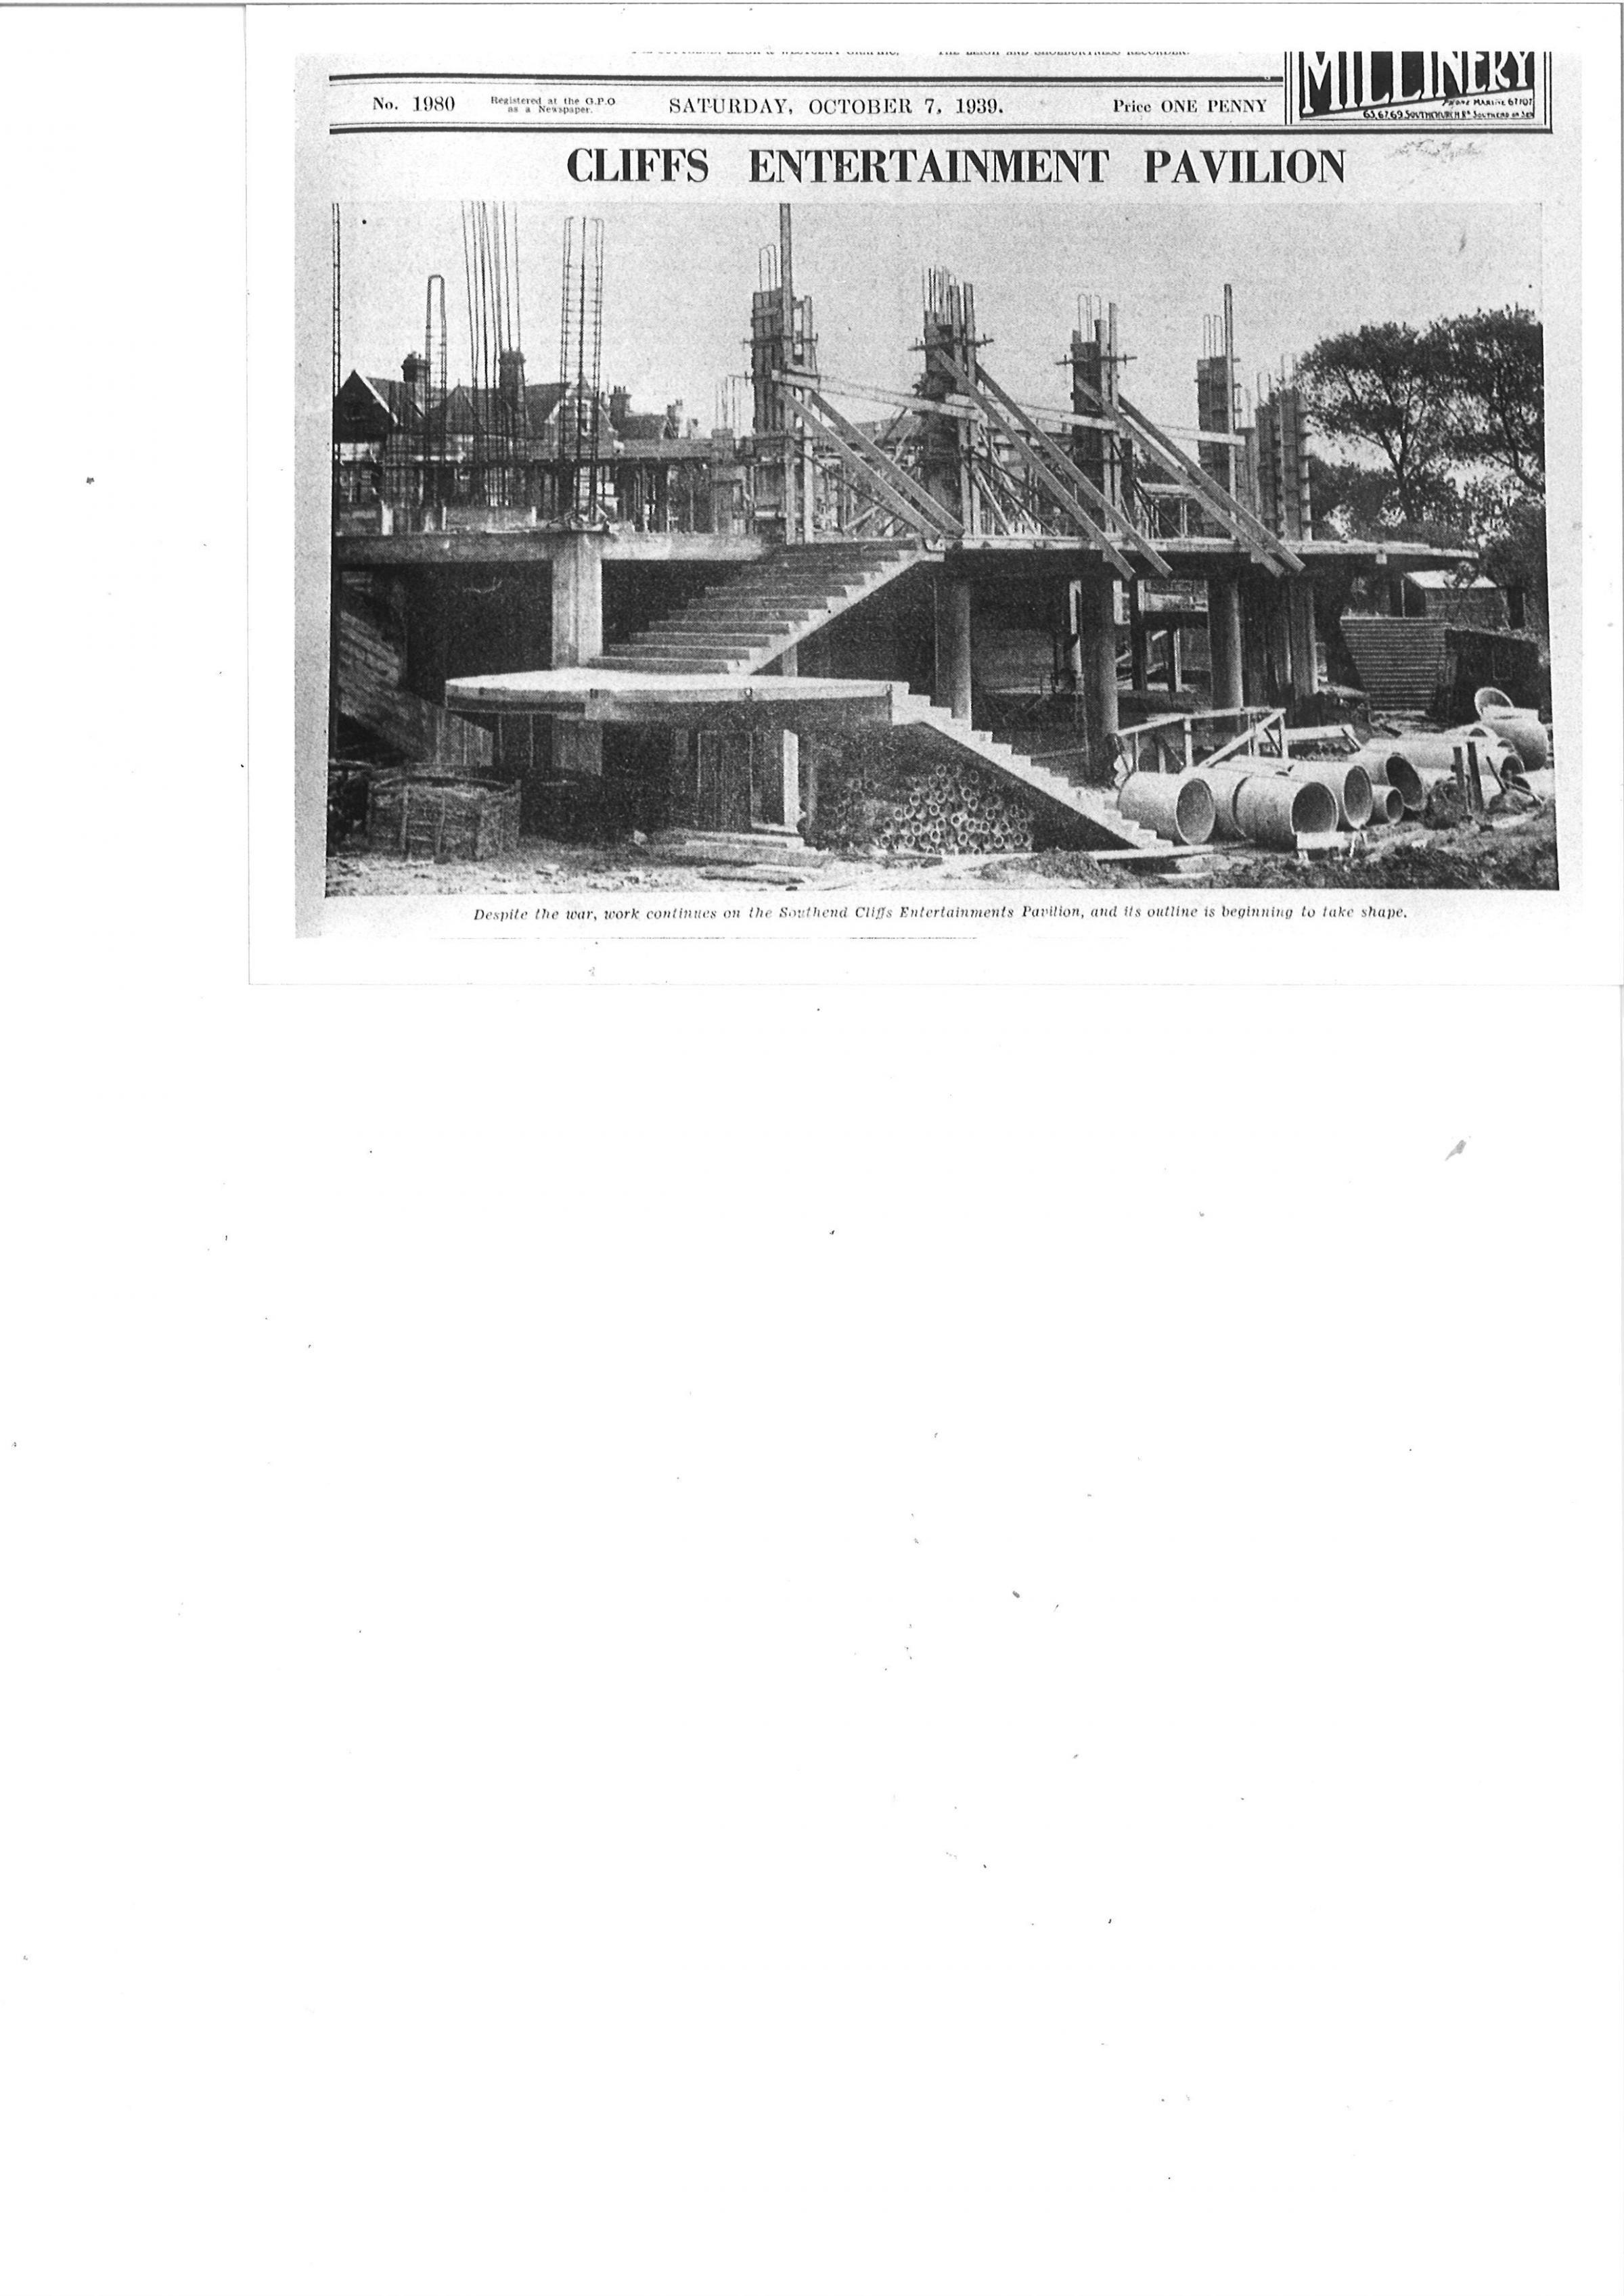 Wartime scenes - the construction of Cliffs Pavilion was put on hold during the Second World War, as this snap from October 1939 shows